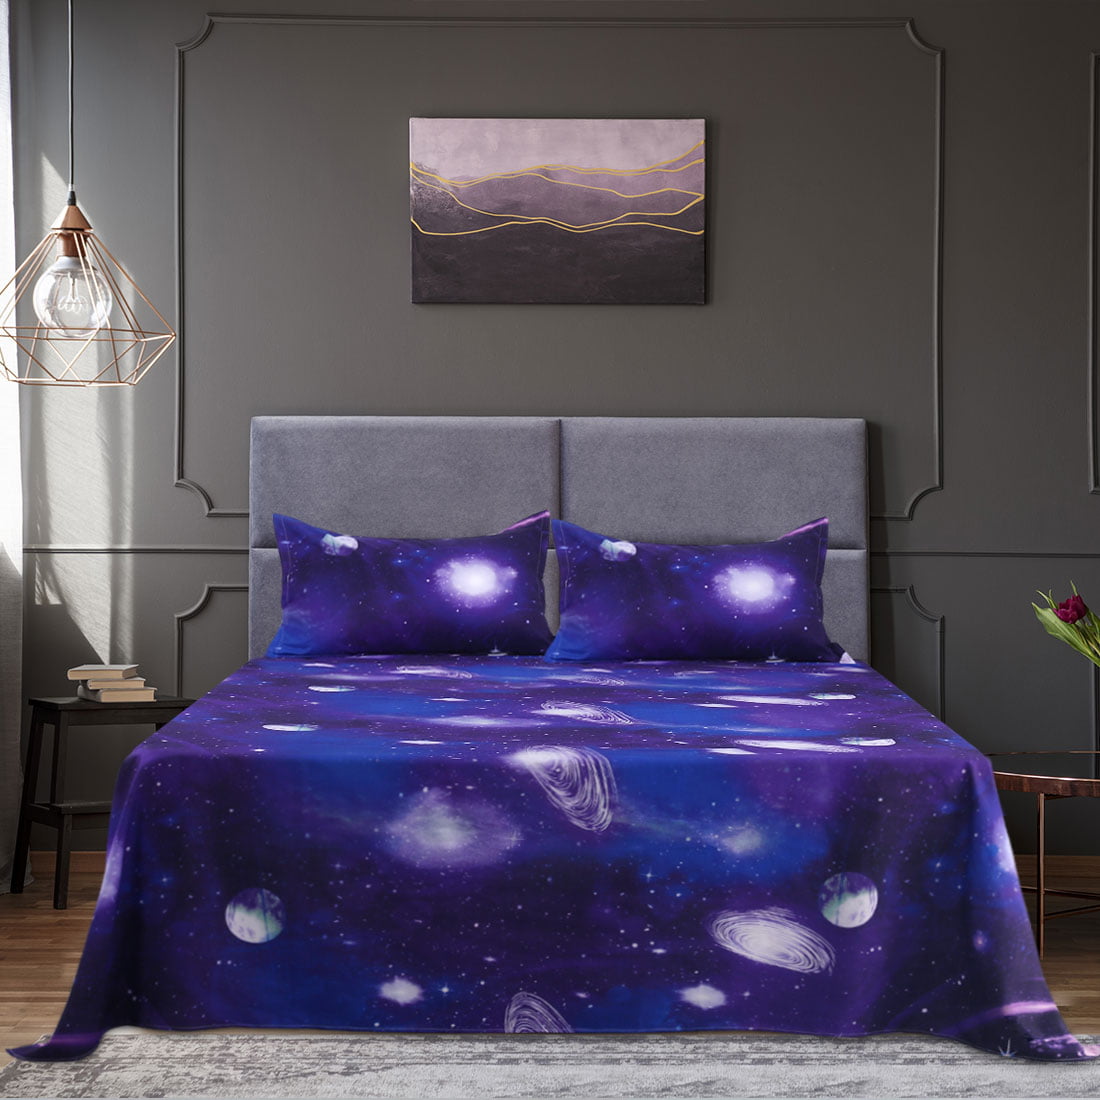 Outer Space Bedding Queen Size Purple Bed Set Star Universe Celestial Comforter Duvet Covers for Kids Teen Boys Girls Bedroom Decor 1PC Quilt Cover with 2PCS Pillow Case Galaxy Bedding Sets 